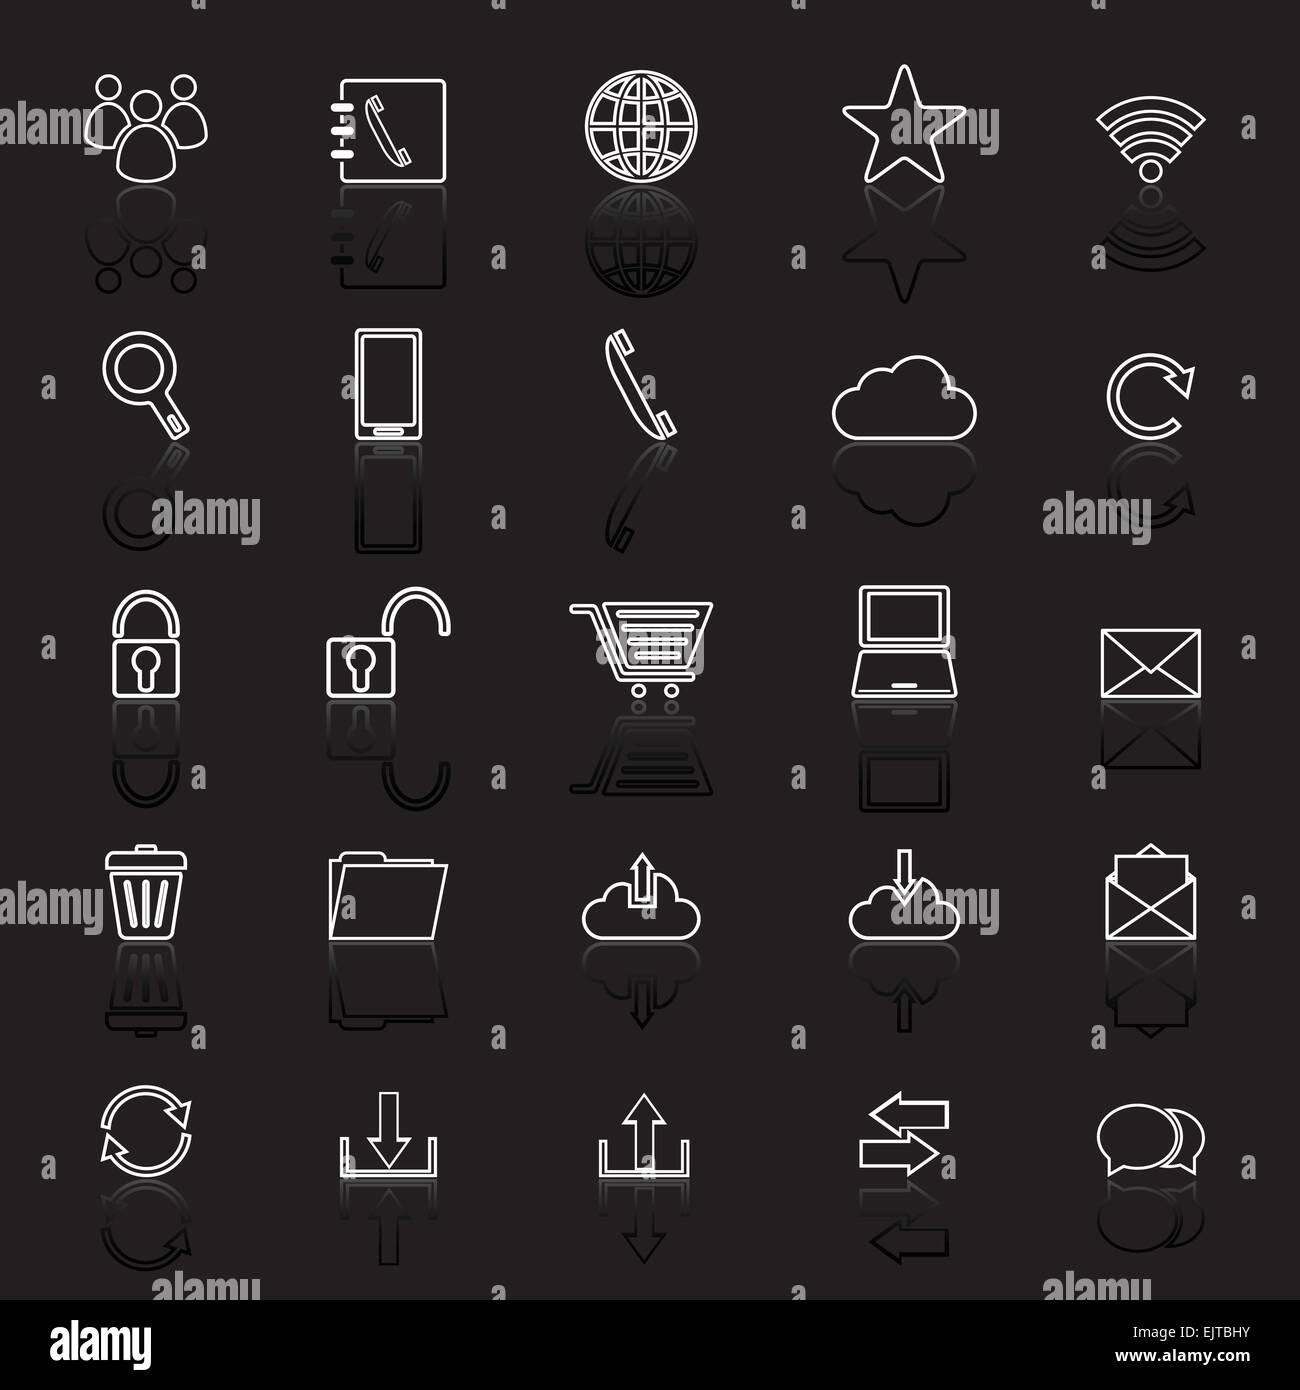 Communication line icons with reflect on black background, stock vector Stock Vector